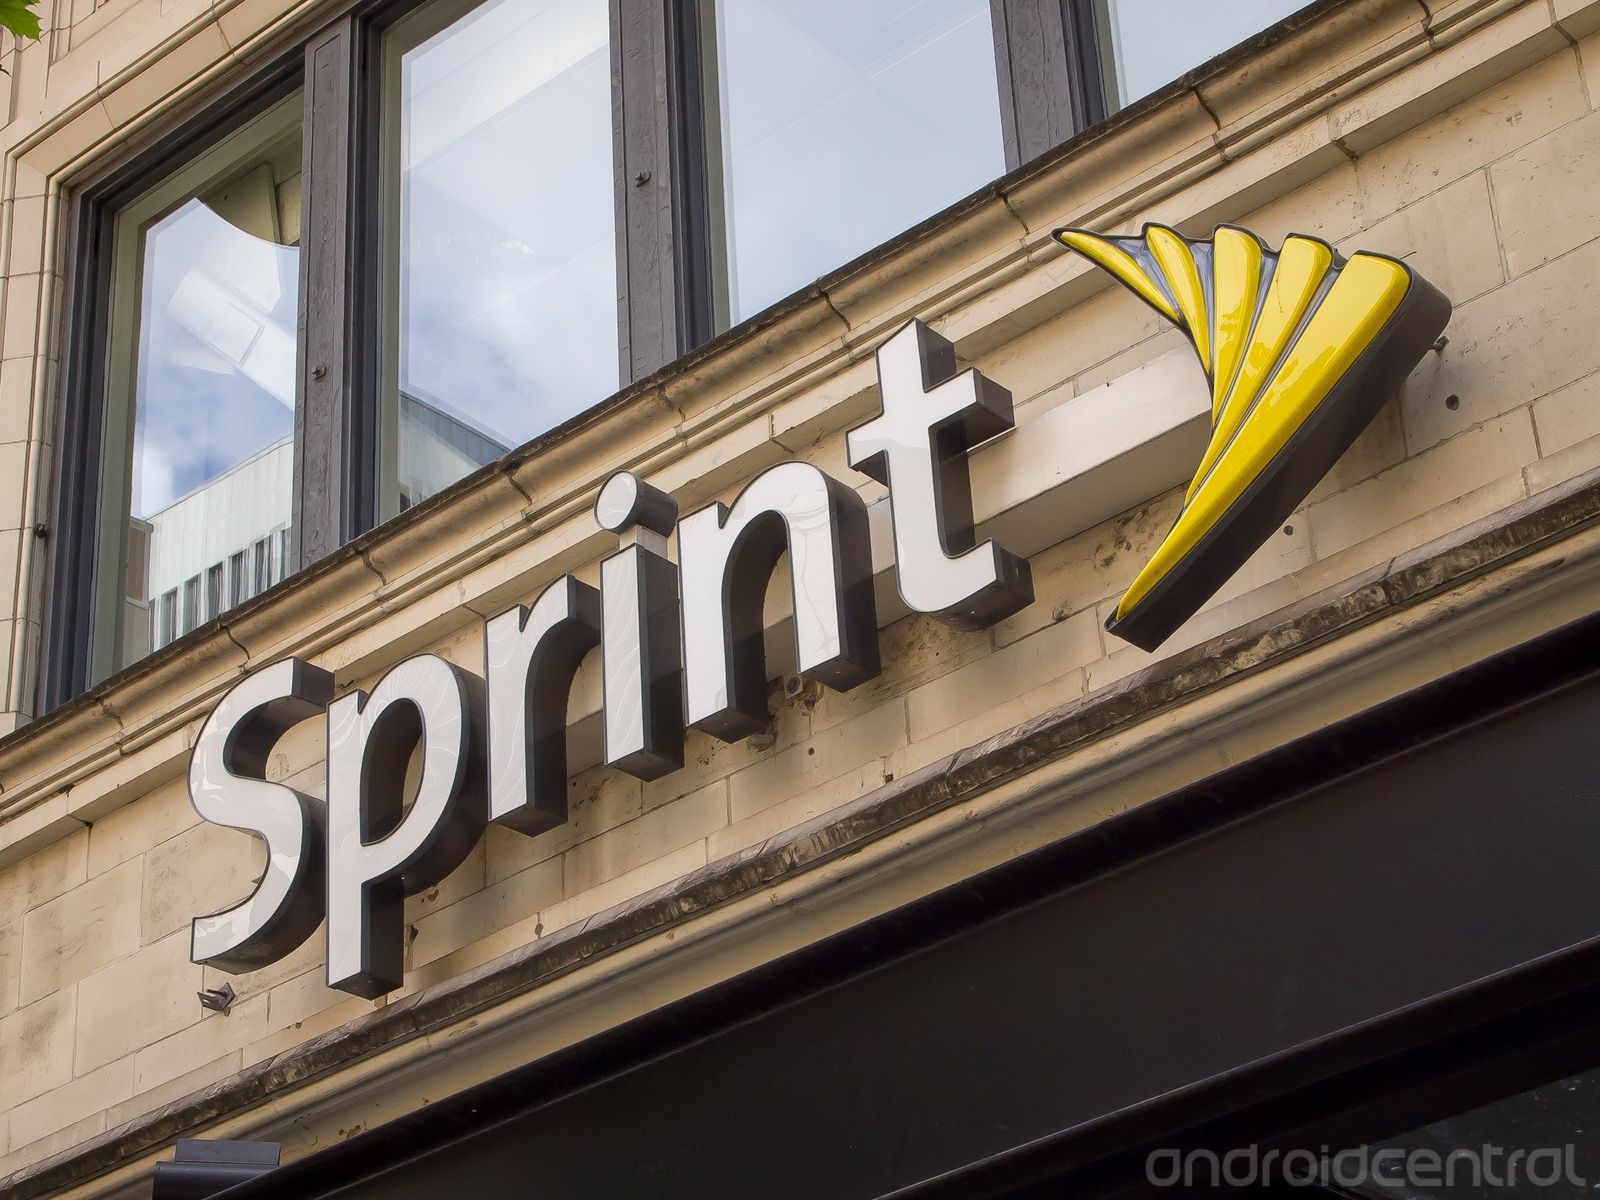 How To Cancel Sprint Android Central